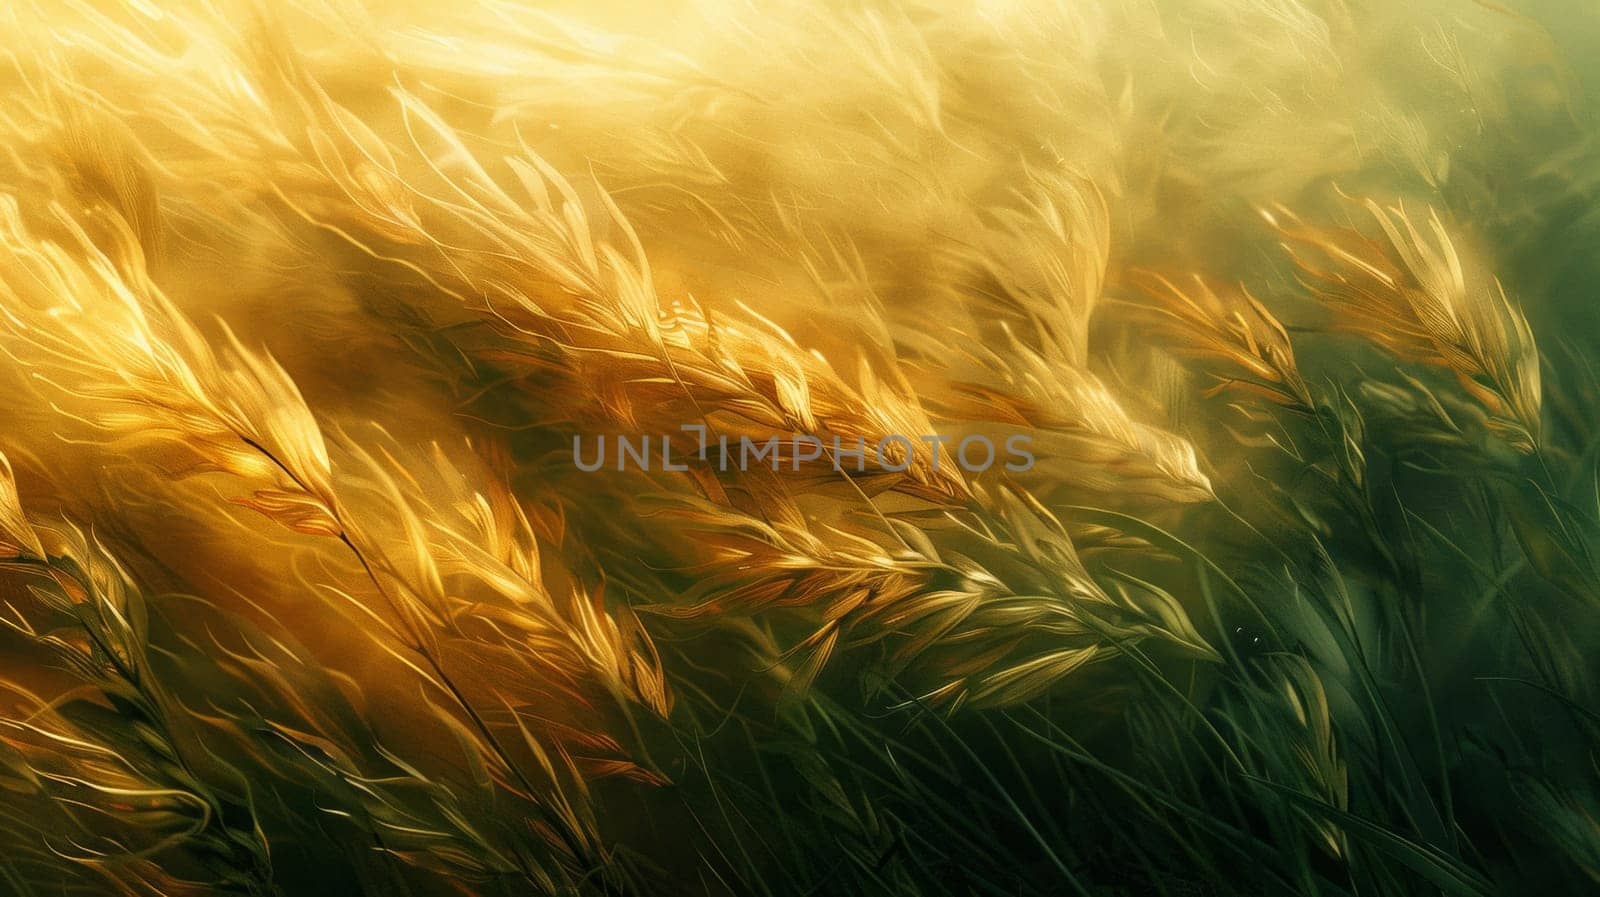 A close up of a field full of tall grass